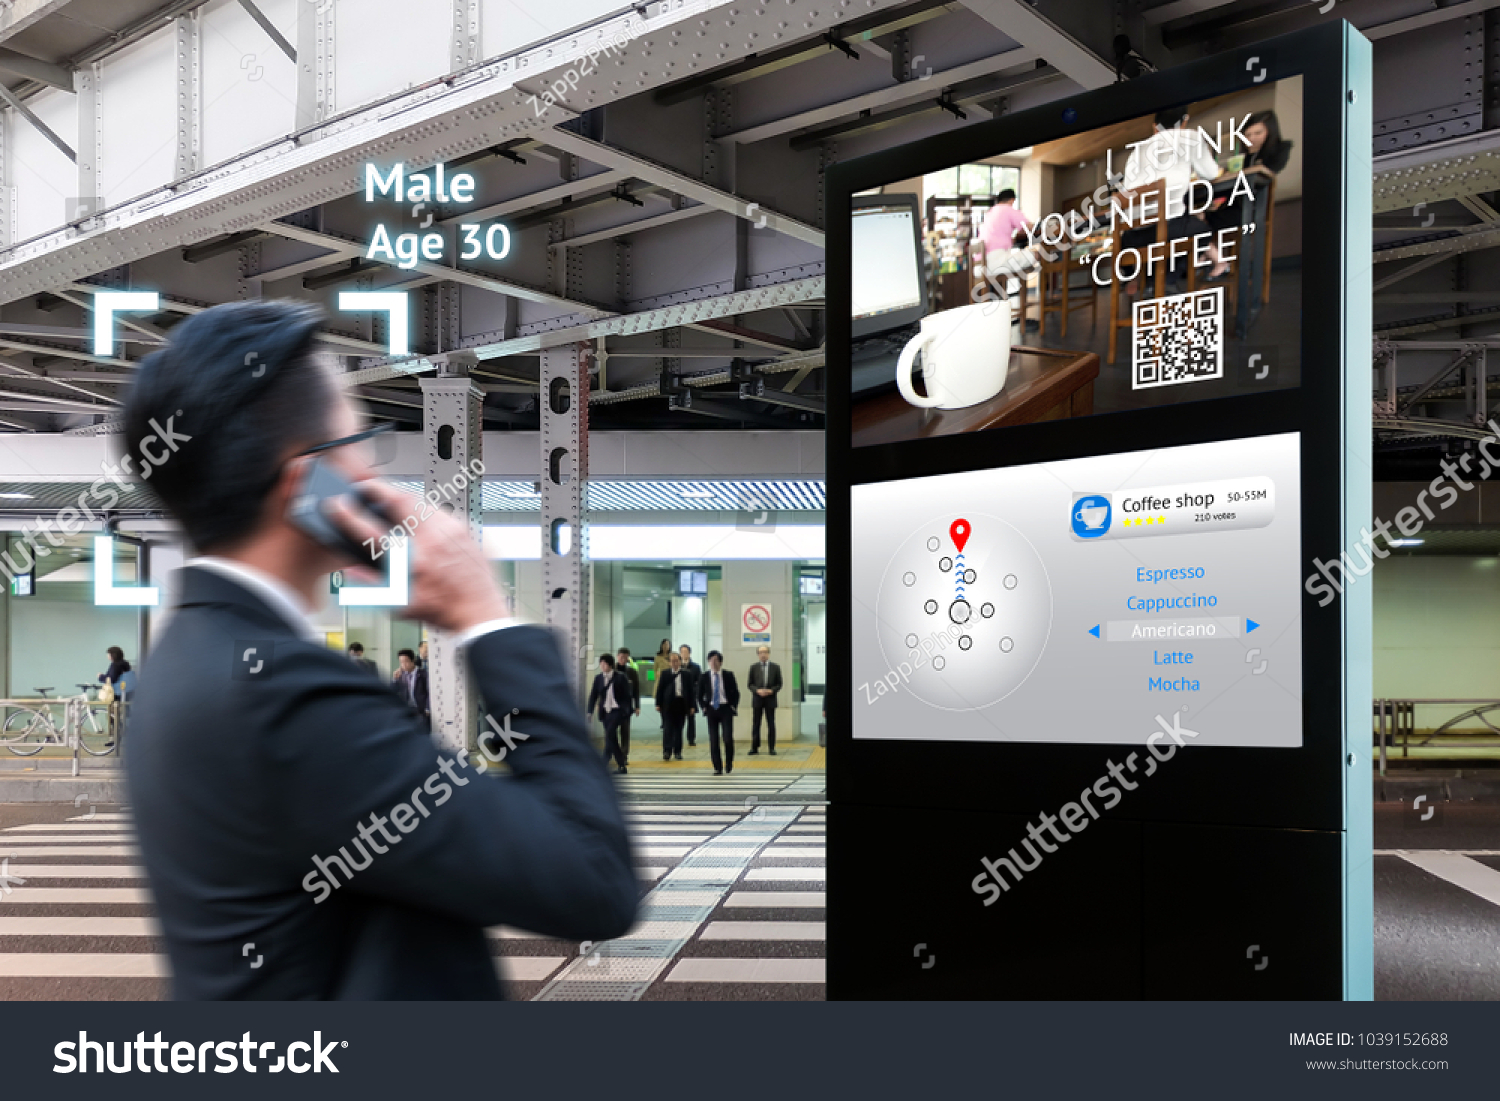 Intelligent Digital Signage , Augmented reality marketing and face recognition concept. Interactive artificial intelligence digital advertisement navigator direction for retail coffee shop. #1039152688